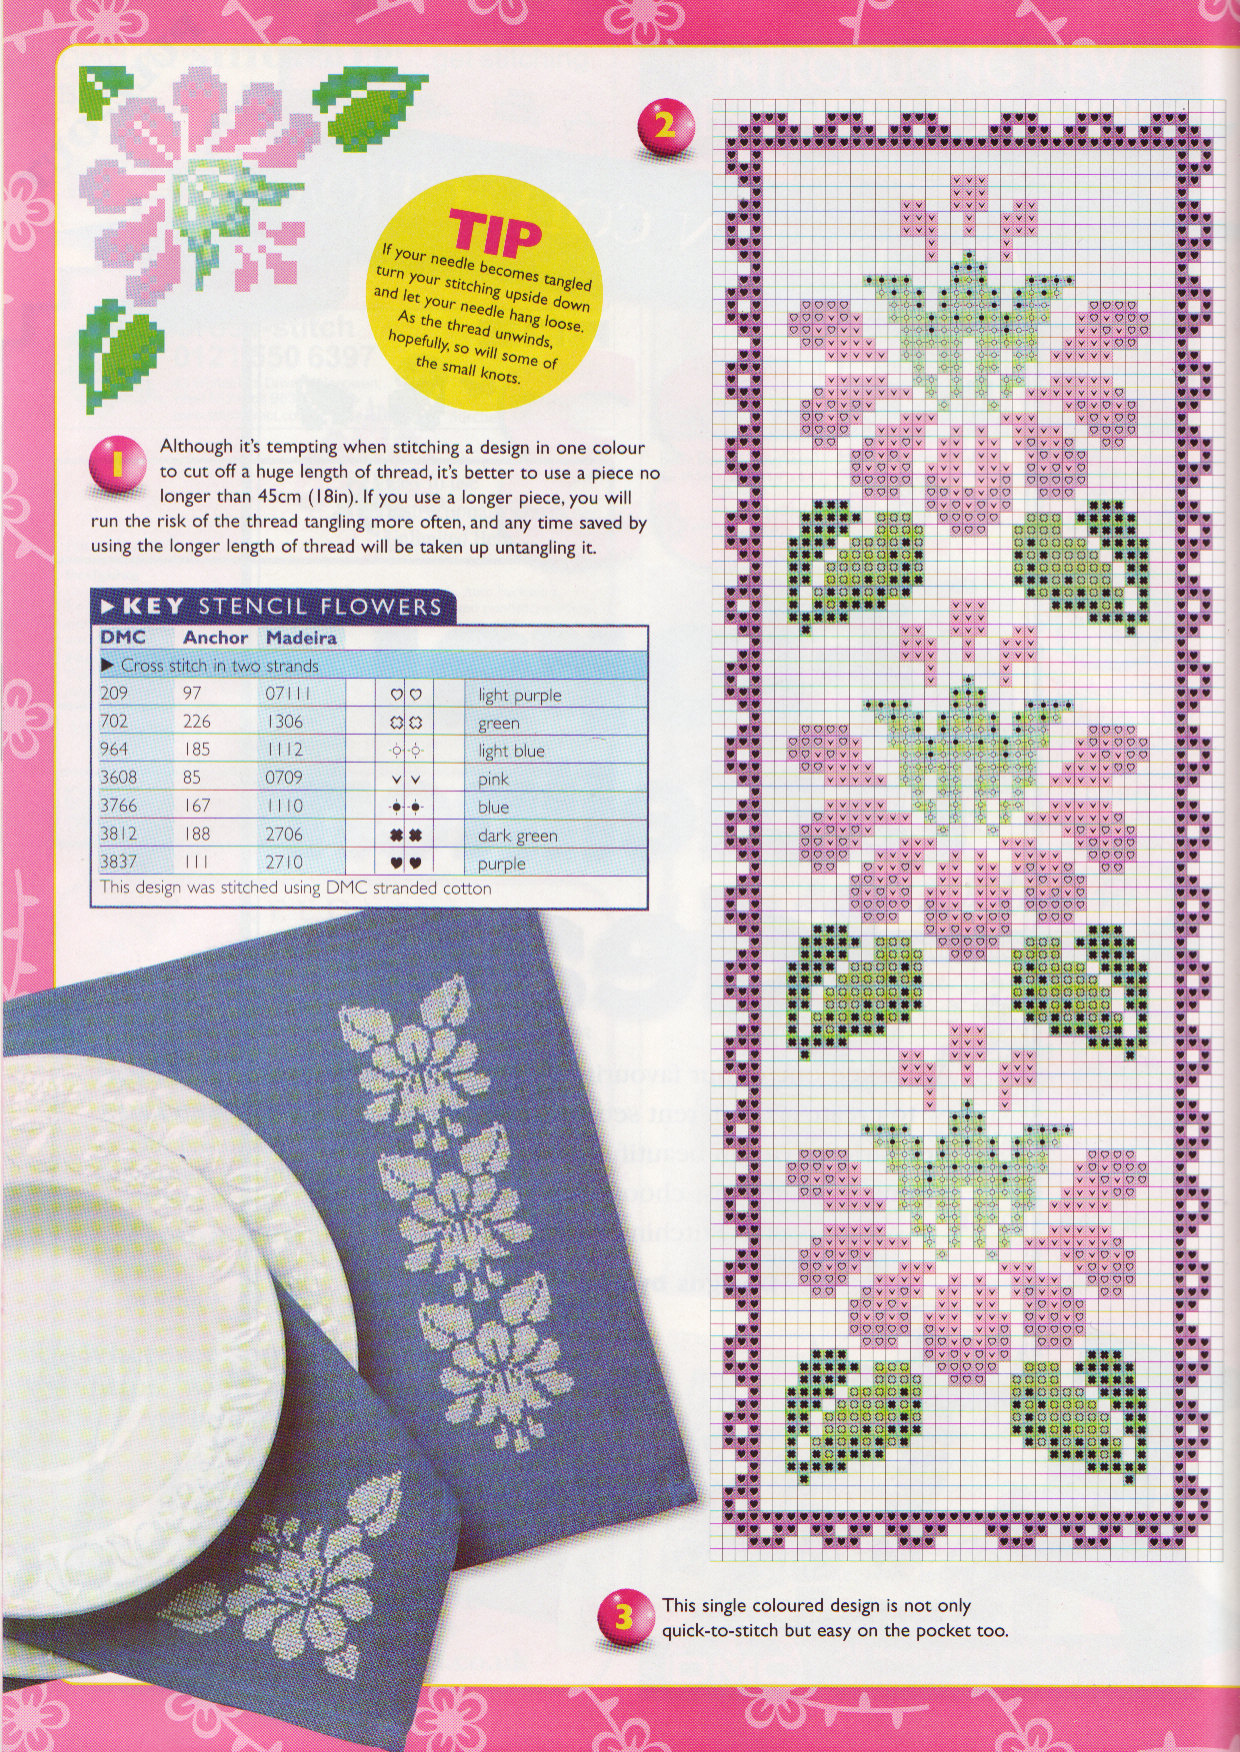 breakfast placemats cross stitch flowers with fuchsia and honeysuckle (1)